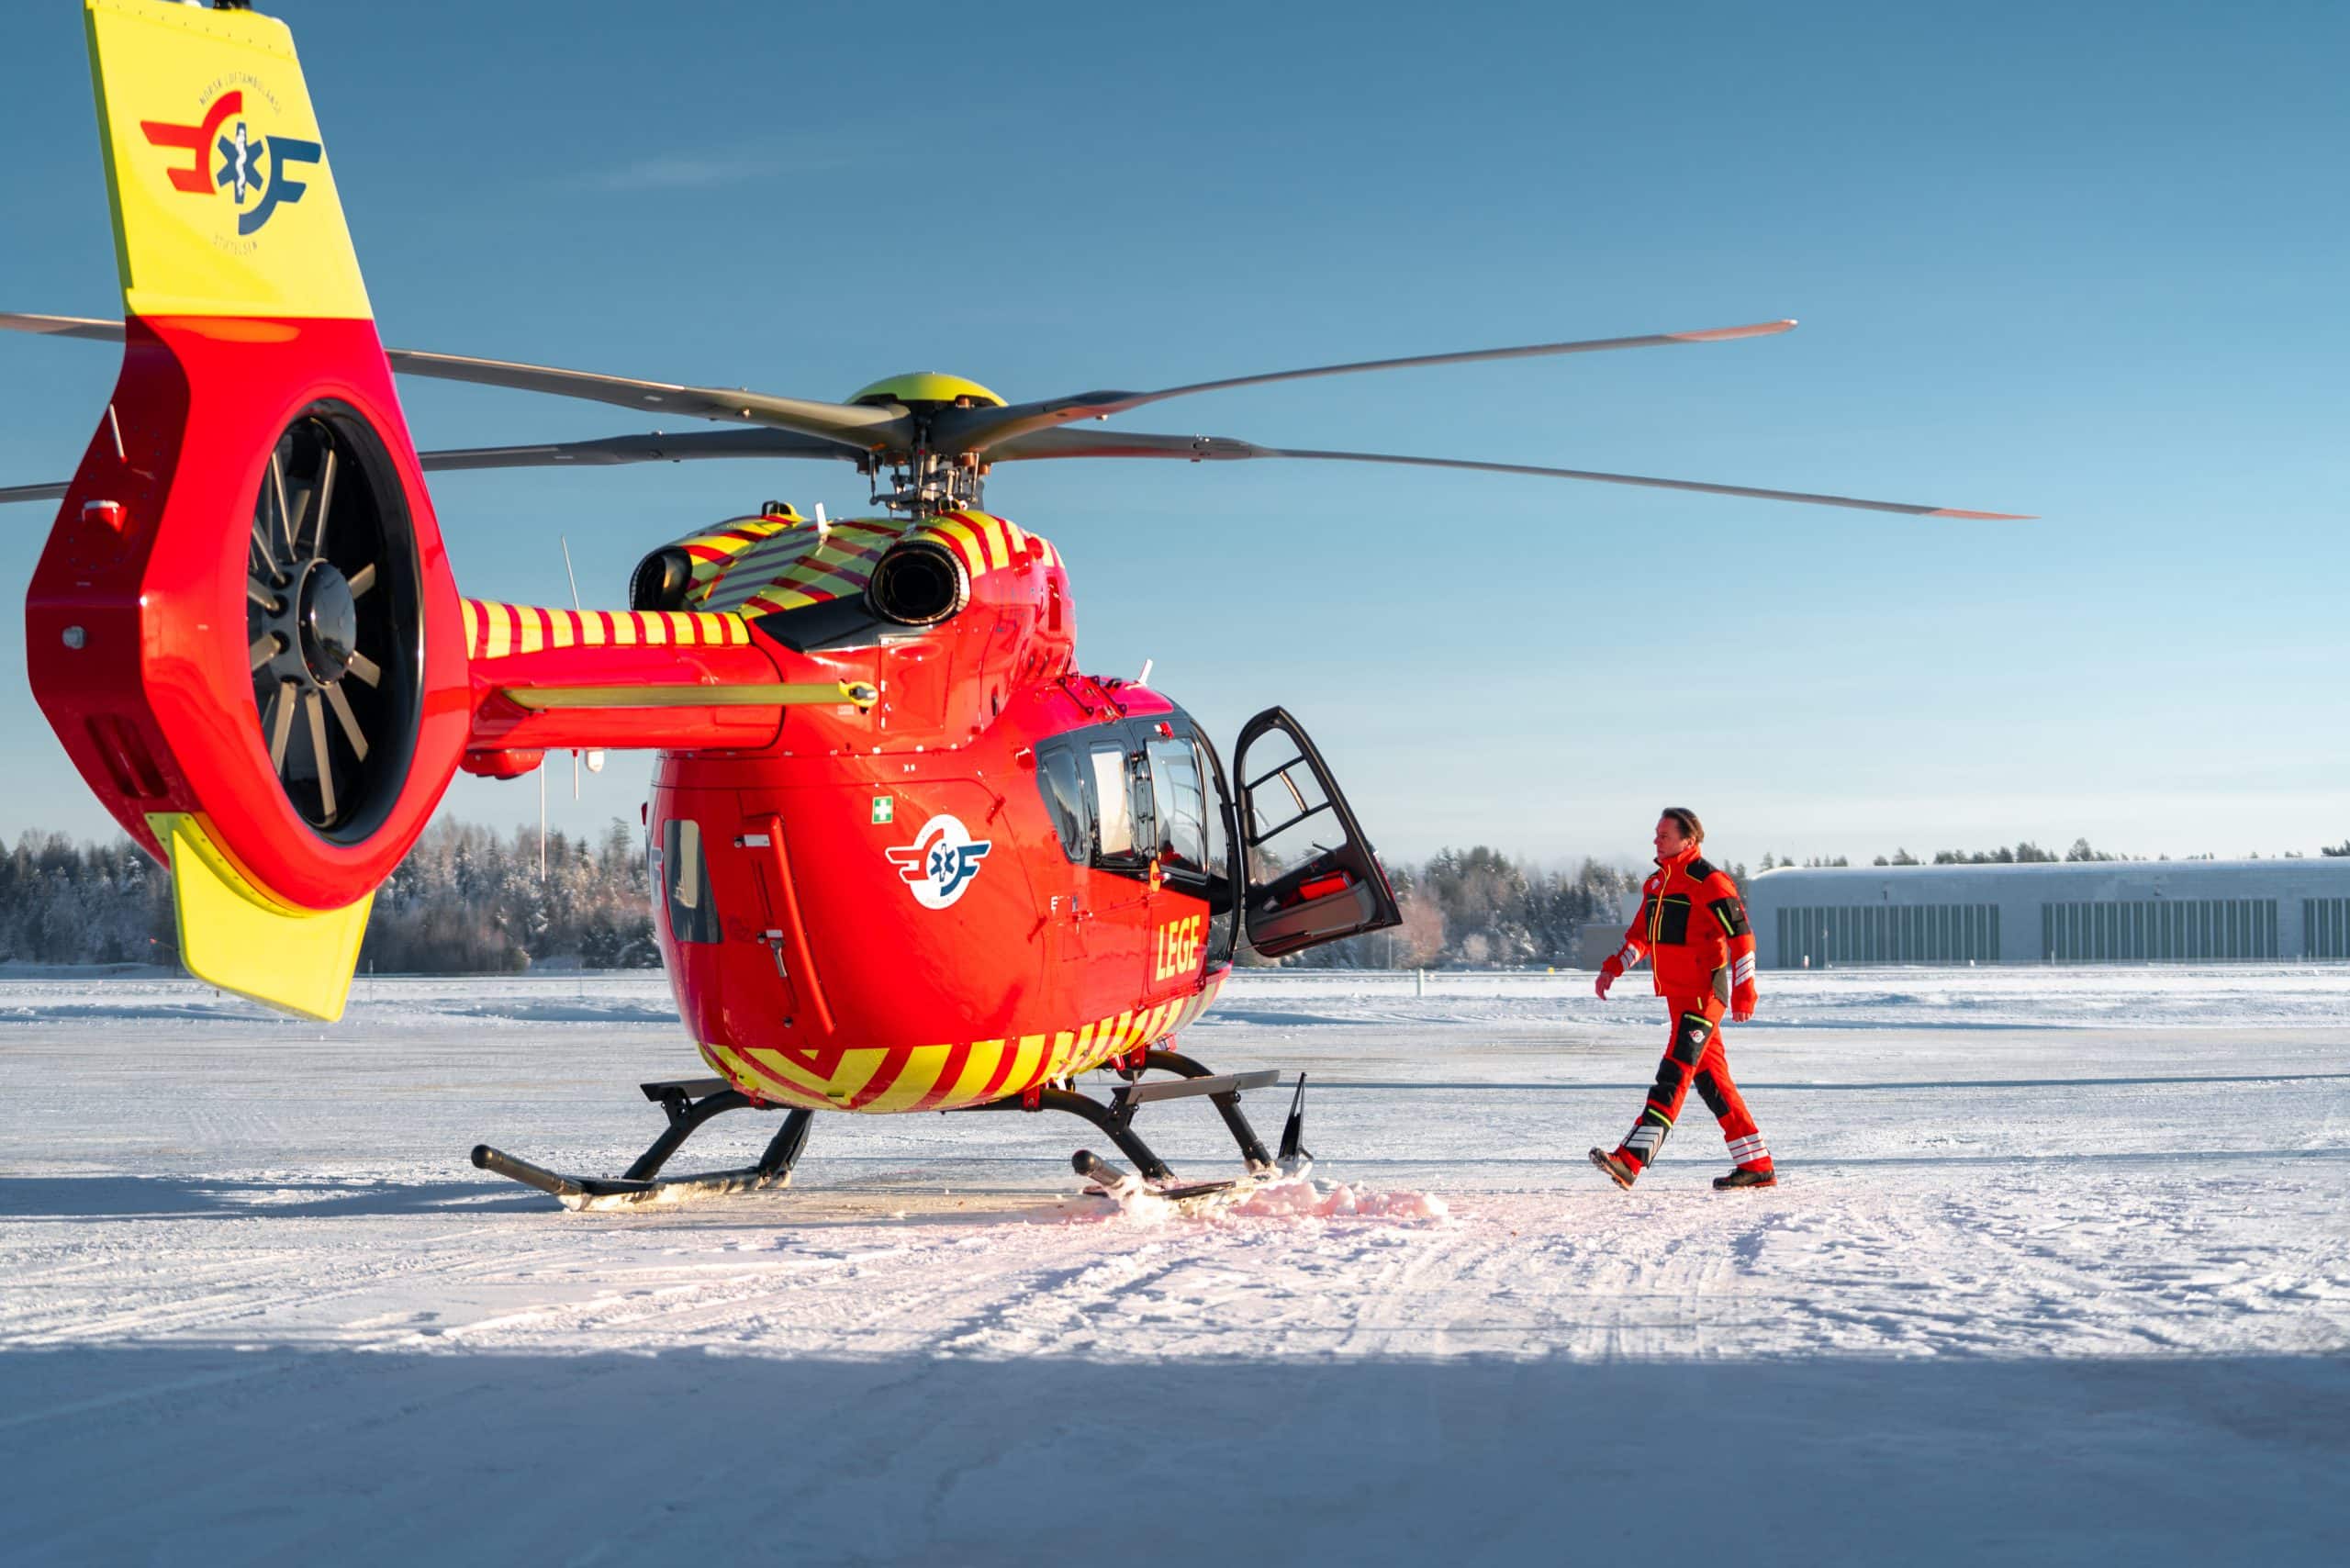 Through innovation the Norwegian Air Ambulance Foundation is working to find new solutions to ensure that the help is both faster and safer.